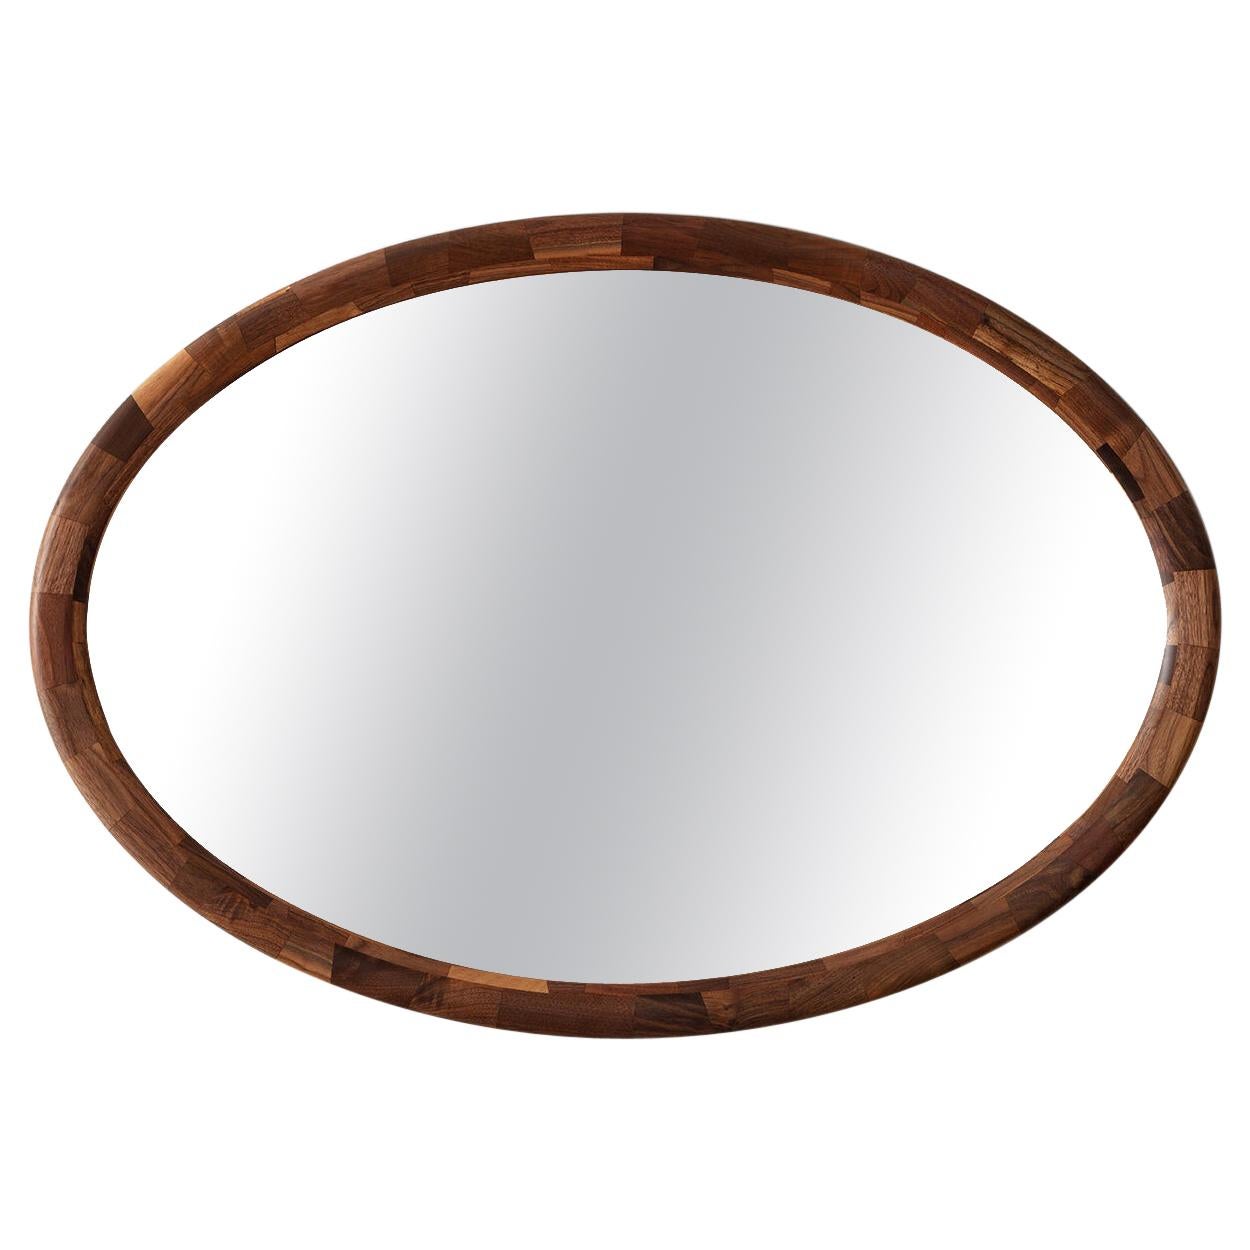 Customizable STACKED Horizontal Oval Mirror by Richard Haining, Shown in Walnut